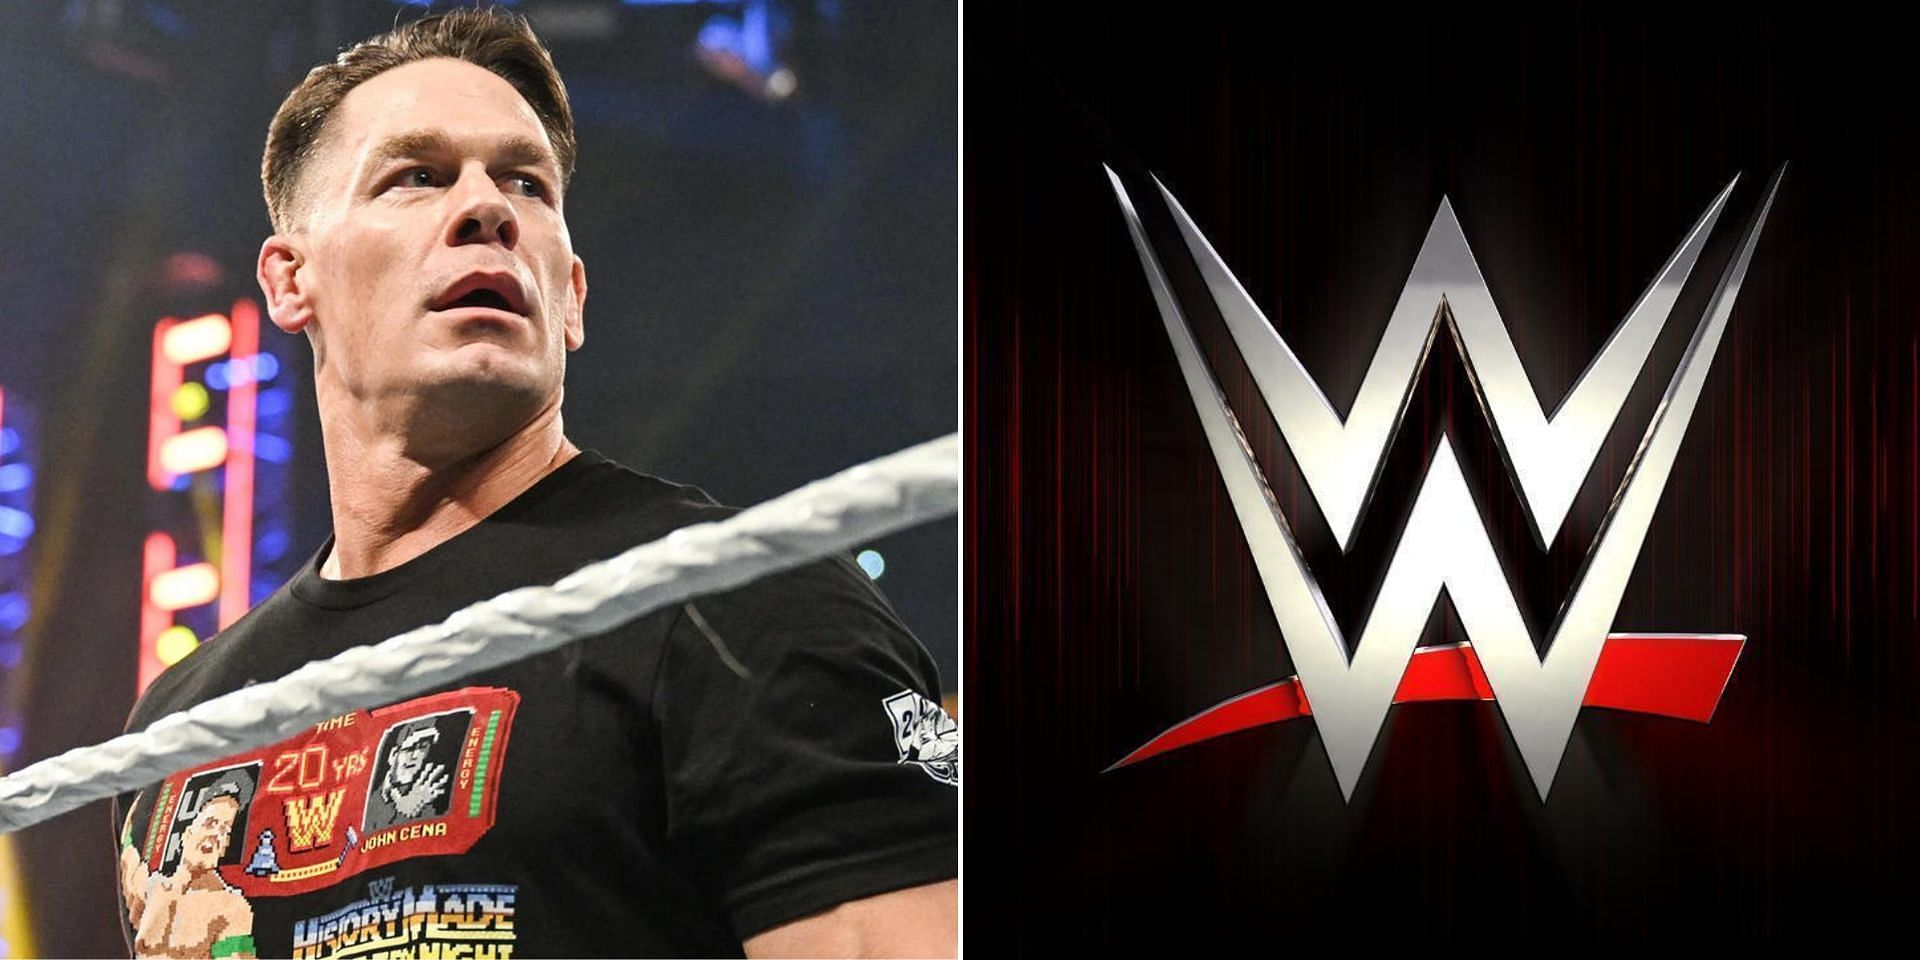 John Cena was involved in a feud with this WWE star